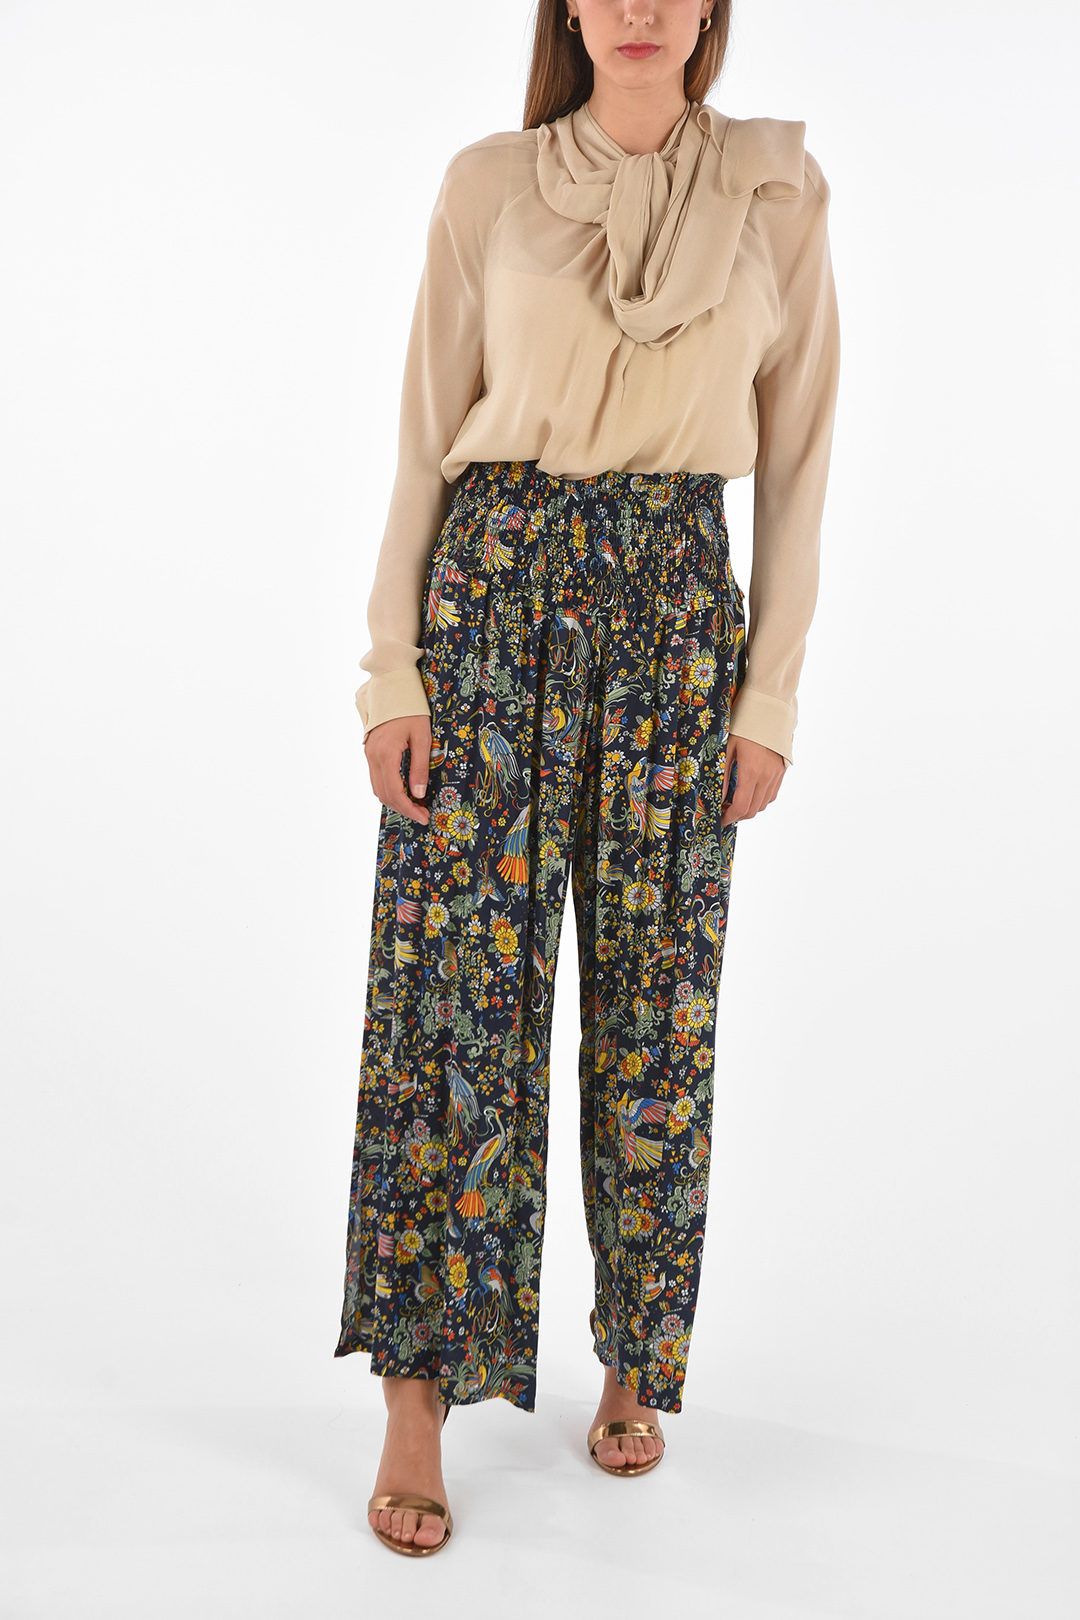 Tory Burch floral-print SMOCKED BEACH high-rise waist palazzo pants women -  Glamood Outlet